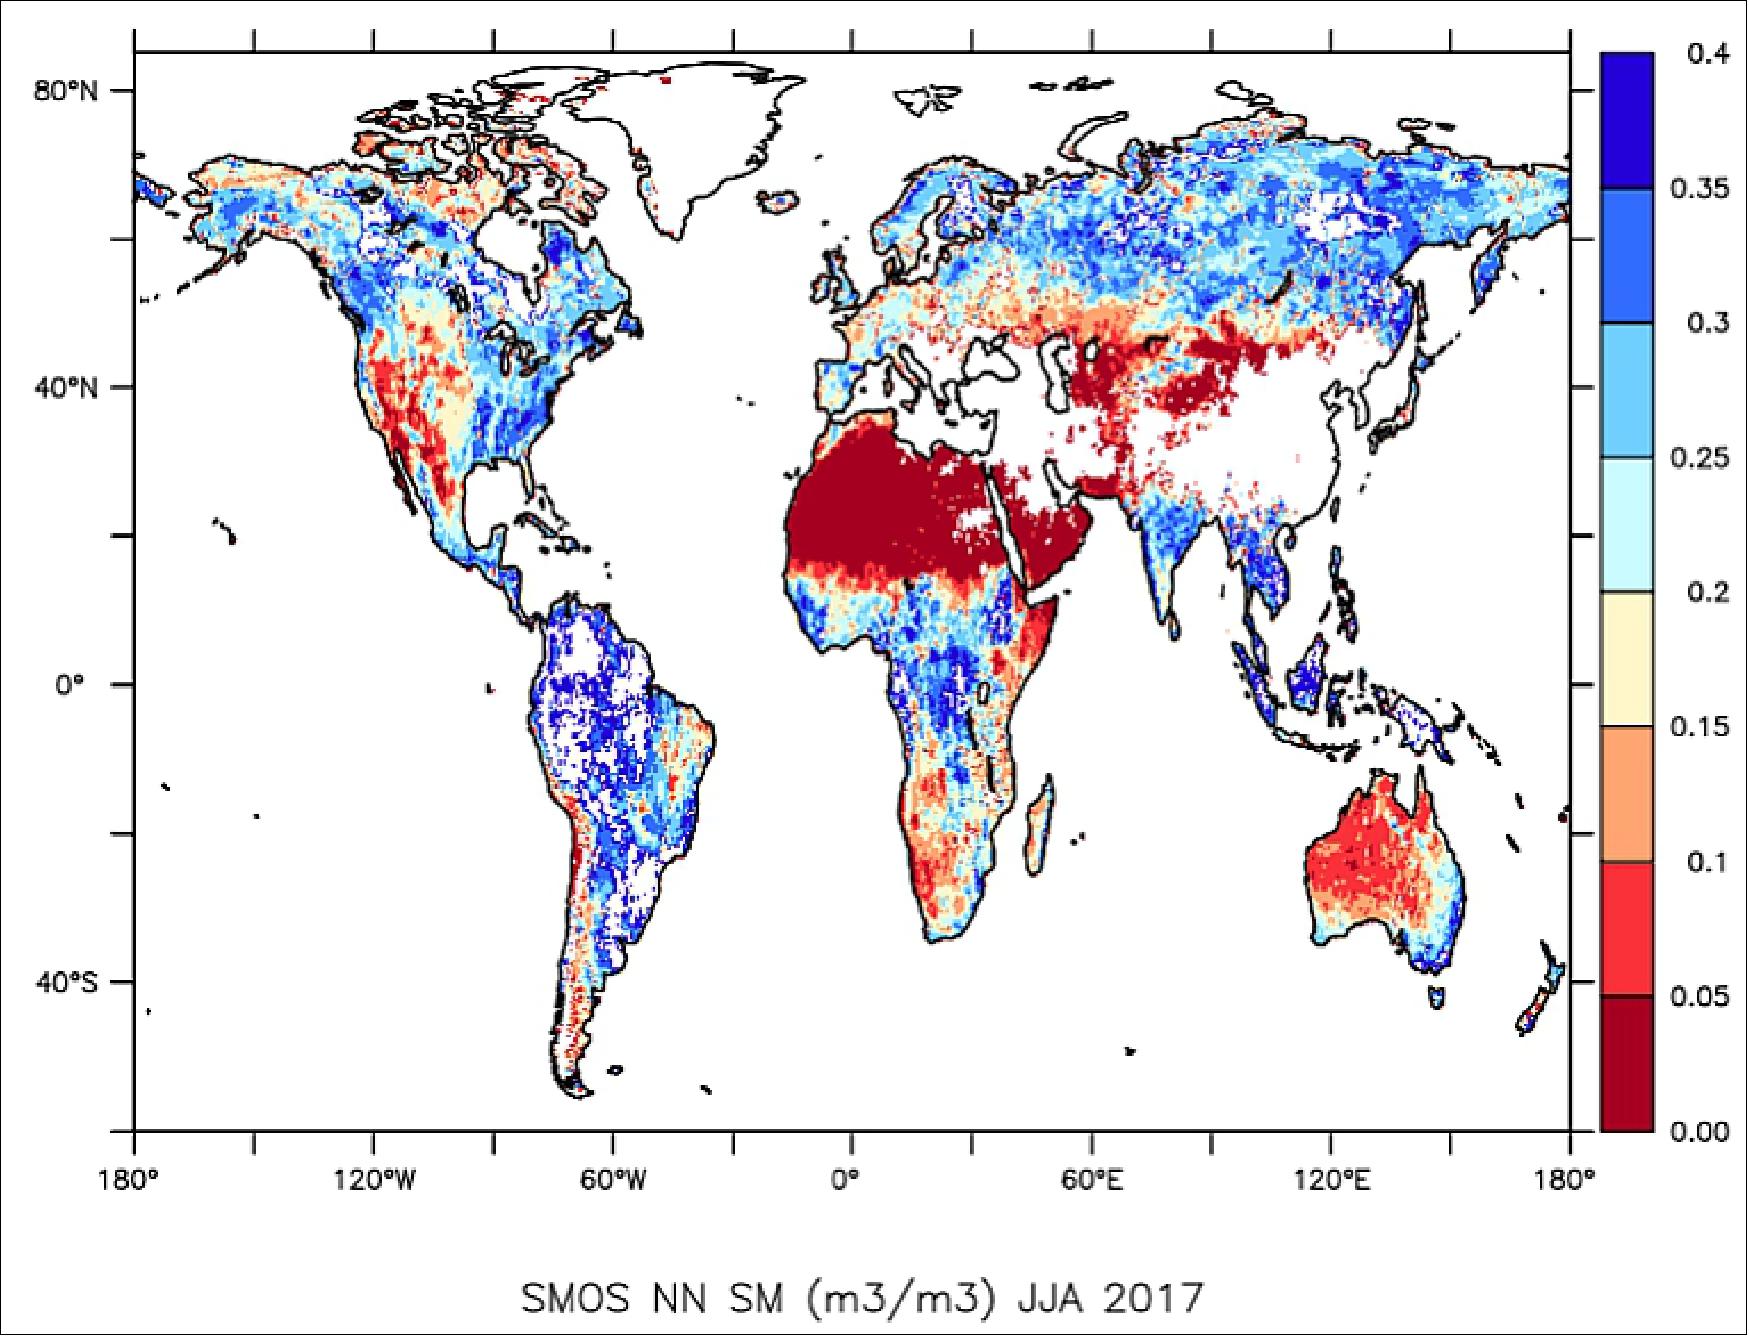 Figure 33: Global soil moisture distribution. Mean soil moisture distribution for June, July and August 2017. The mean was computed from swath-based soil-moisture generated by the ‘neural network’ in Near-Real-Time at ECMWF (image credit: ECMWF)